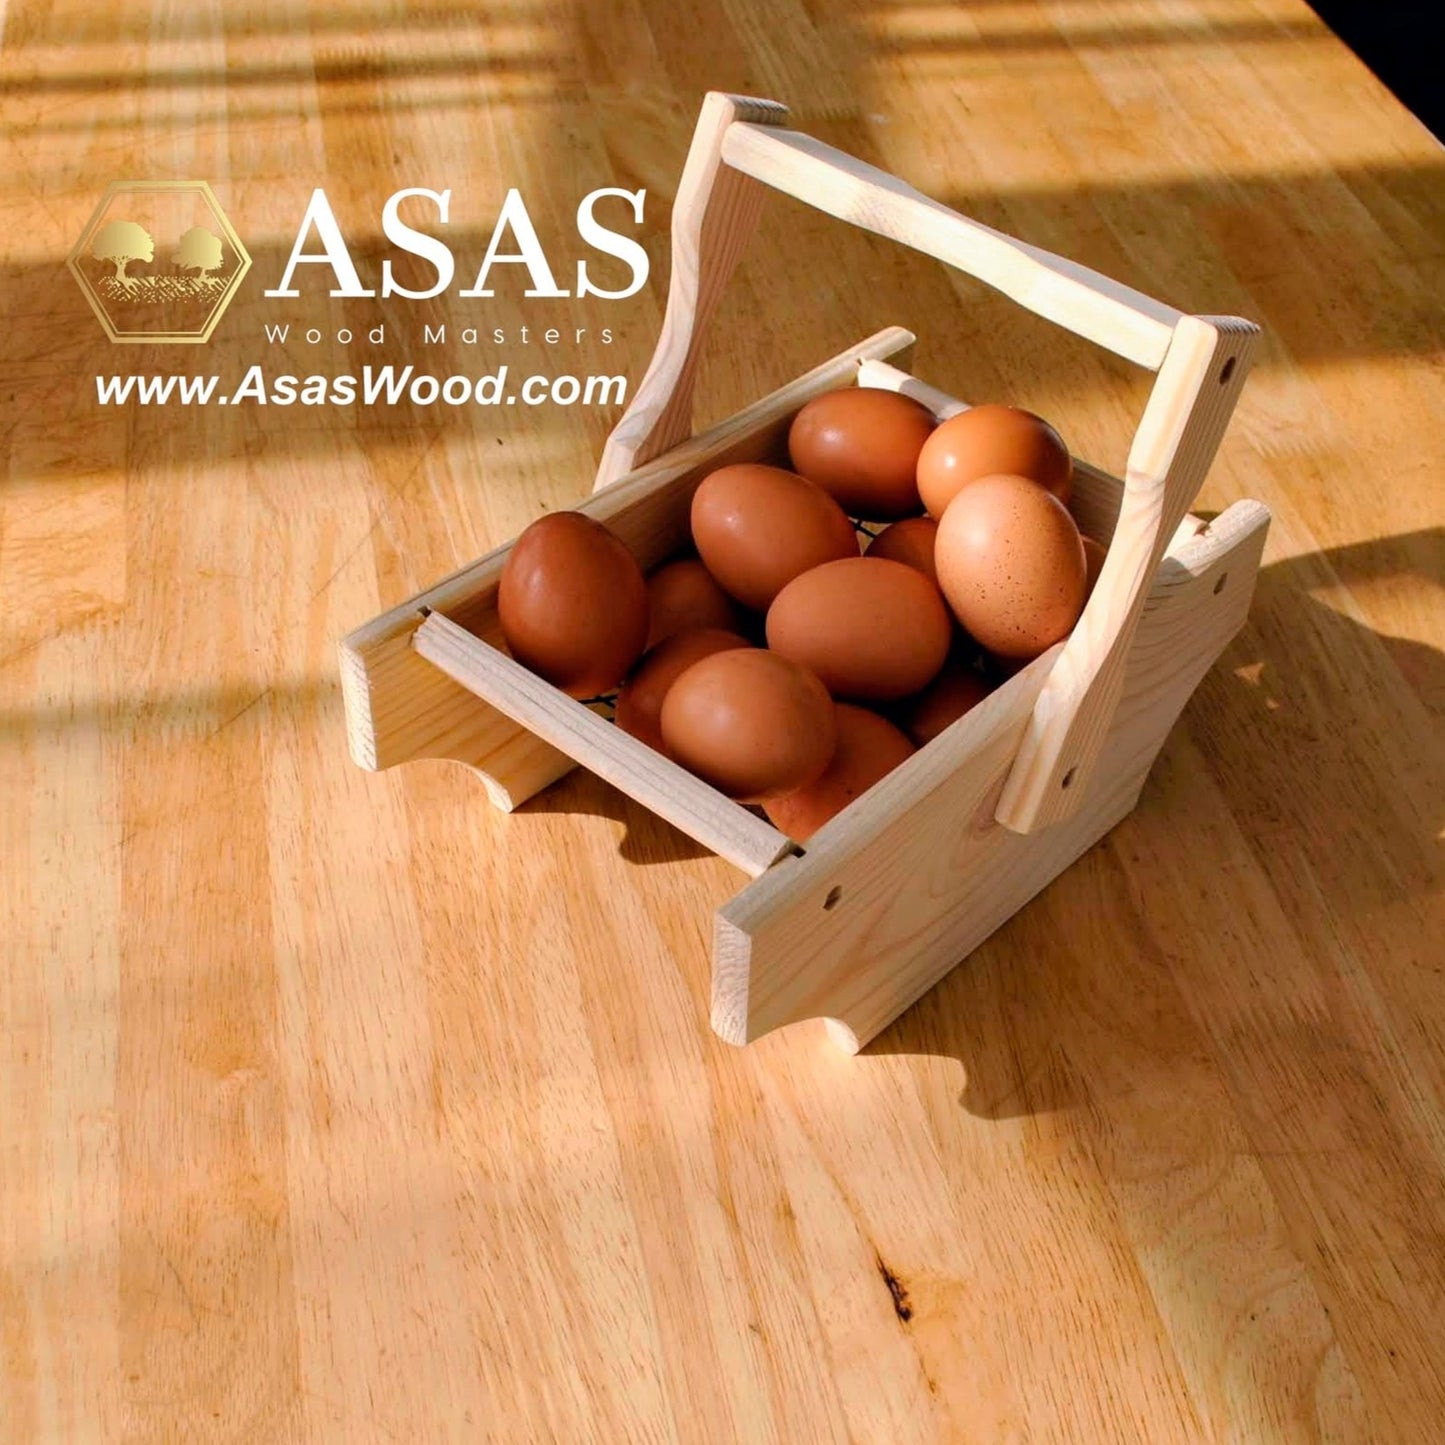 Egg collection basket, gift wooden, made by asaswood